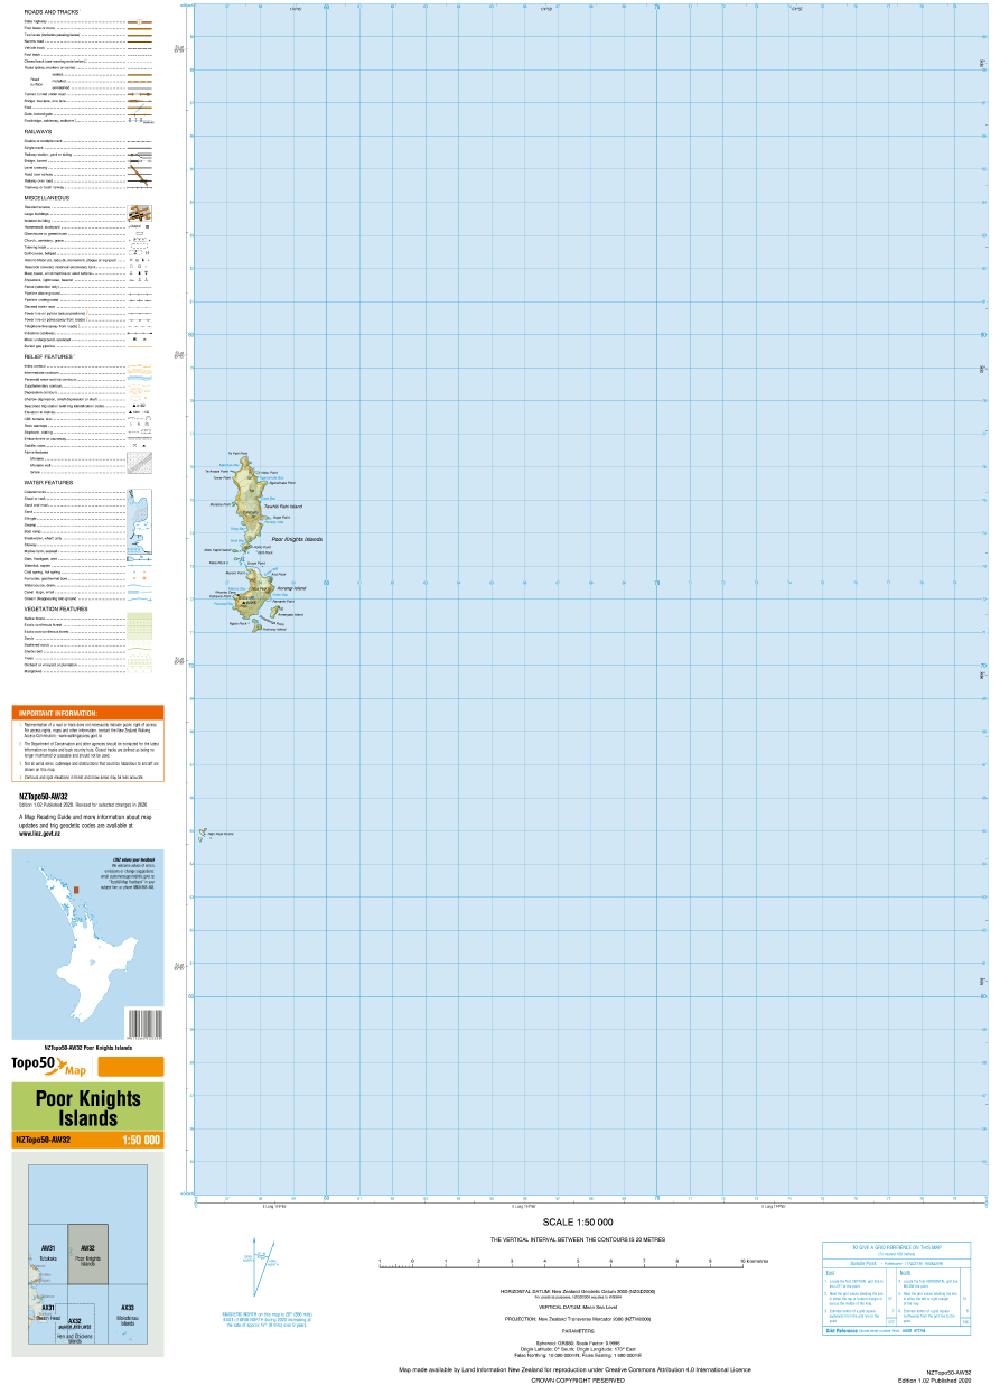 Topo map of Poor Knights Islands